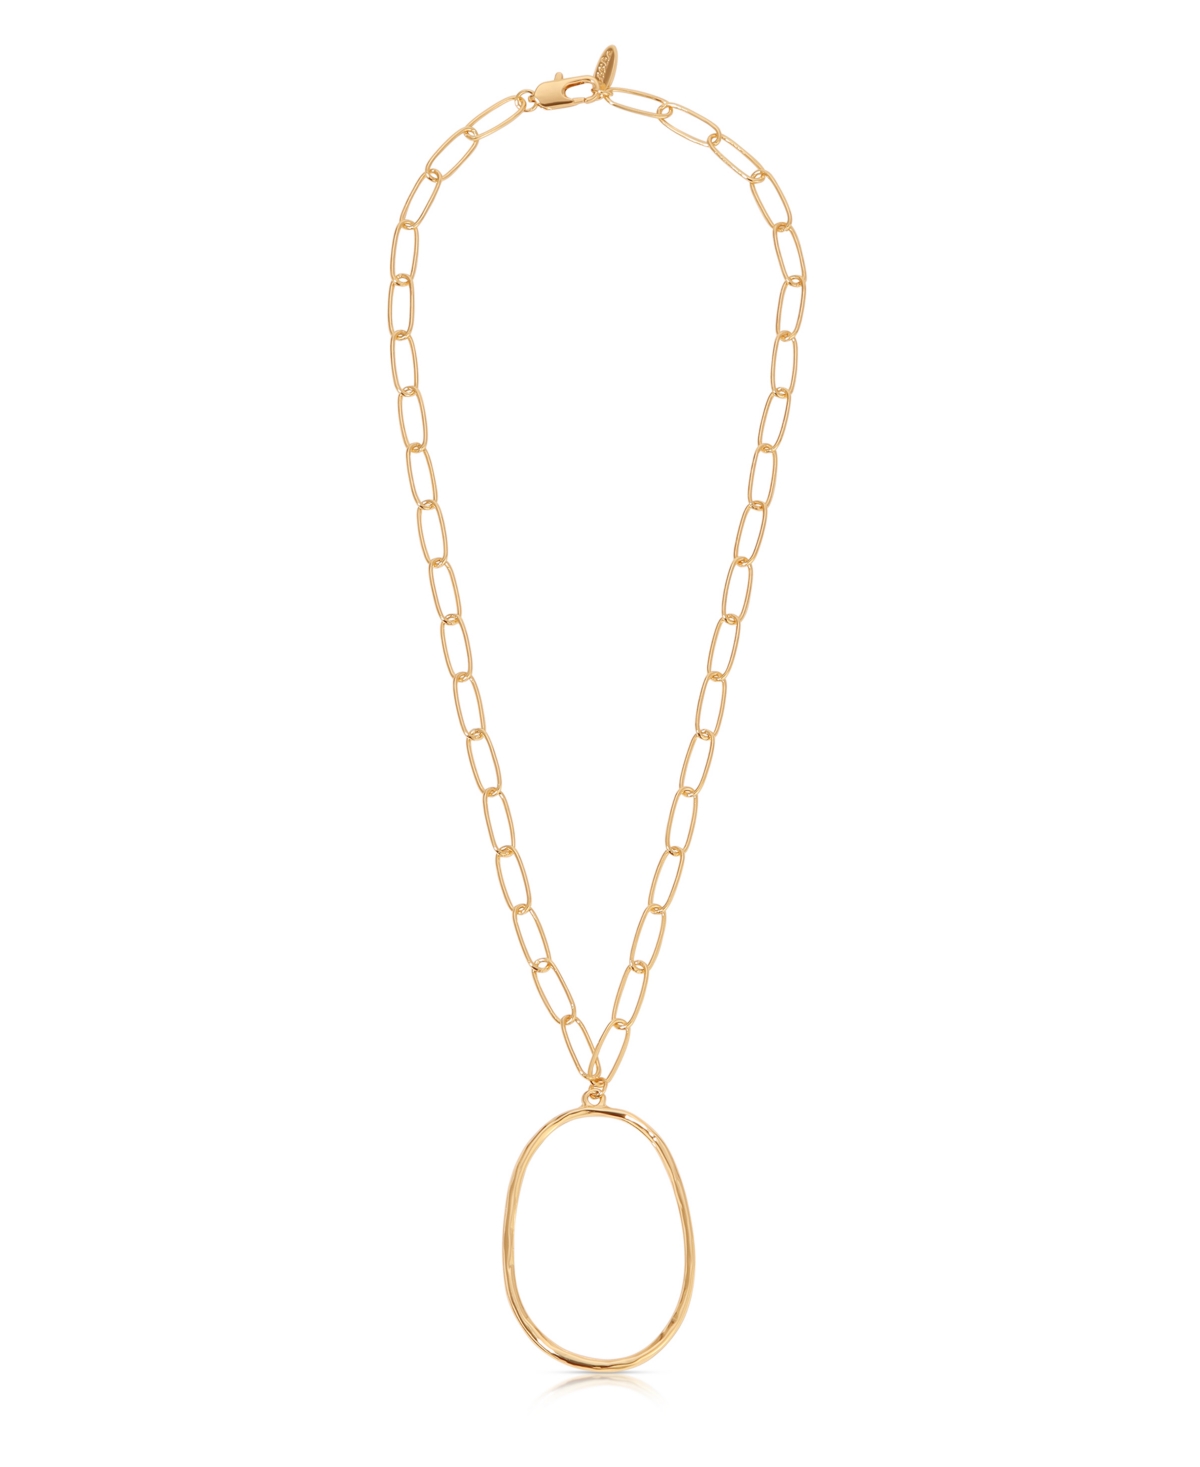 Large 18K Gold-Plated Oval Pendant Chain Link Necklace - Gold